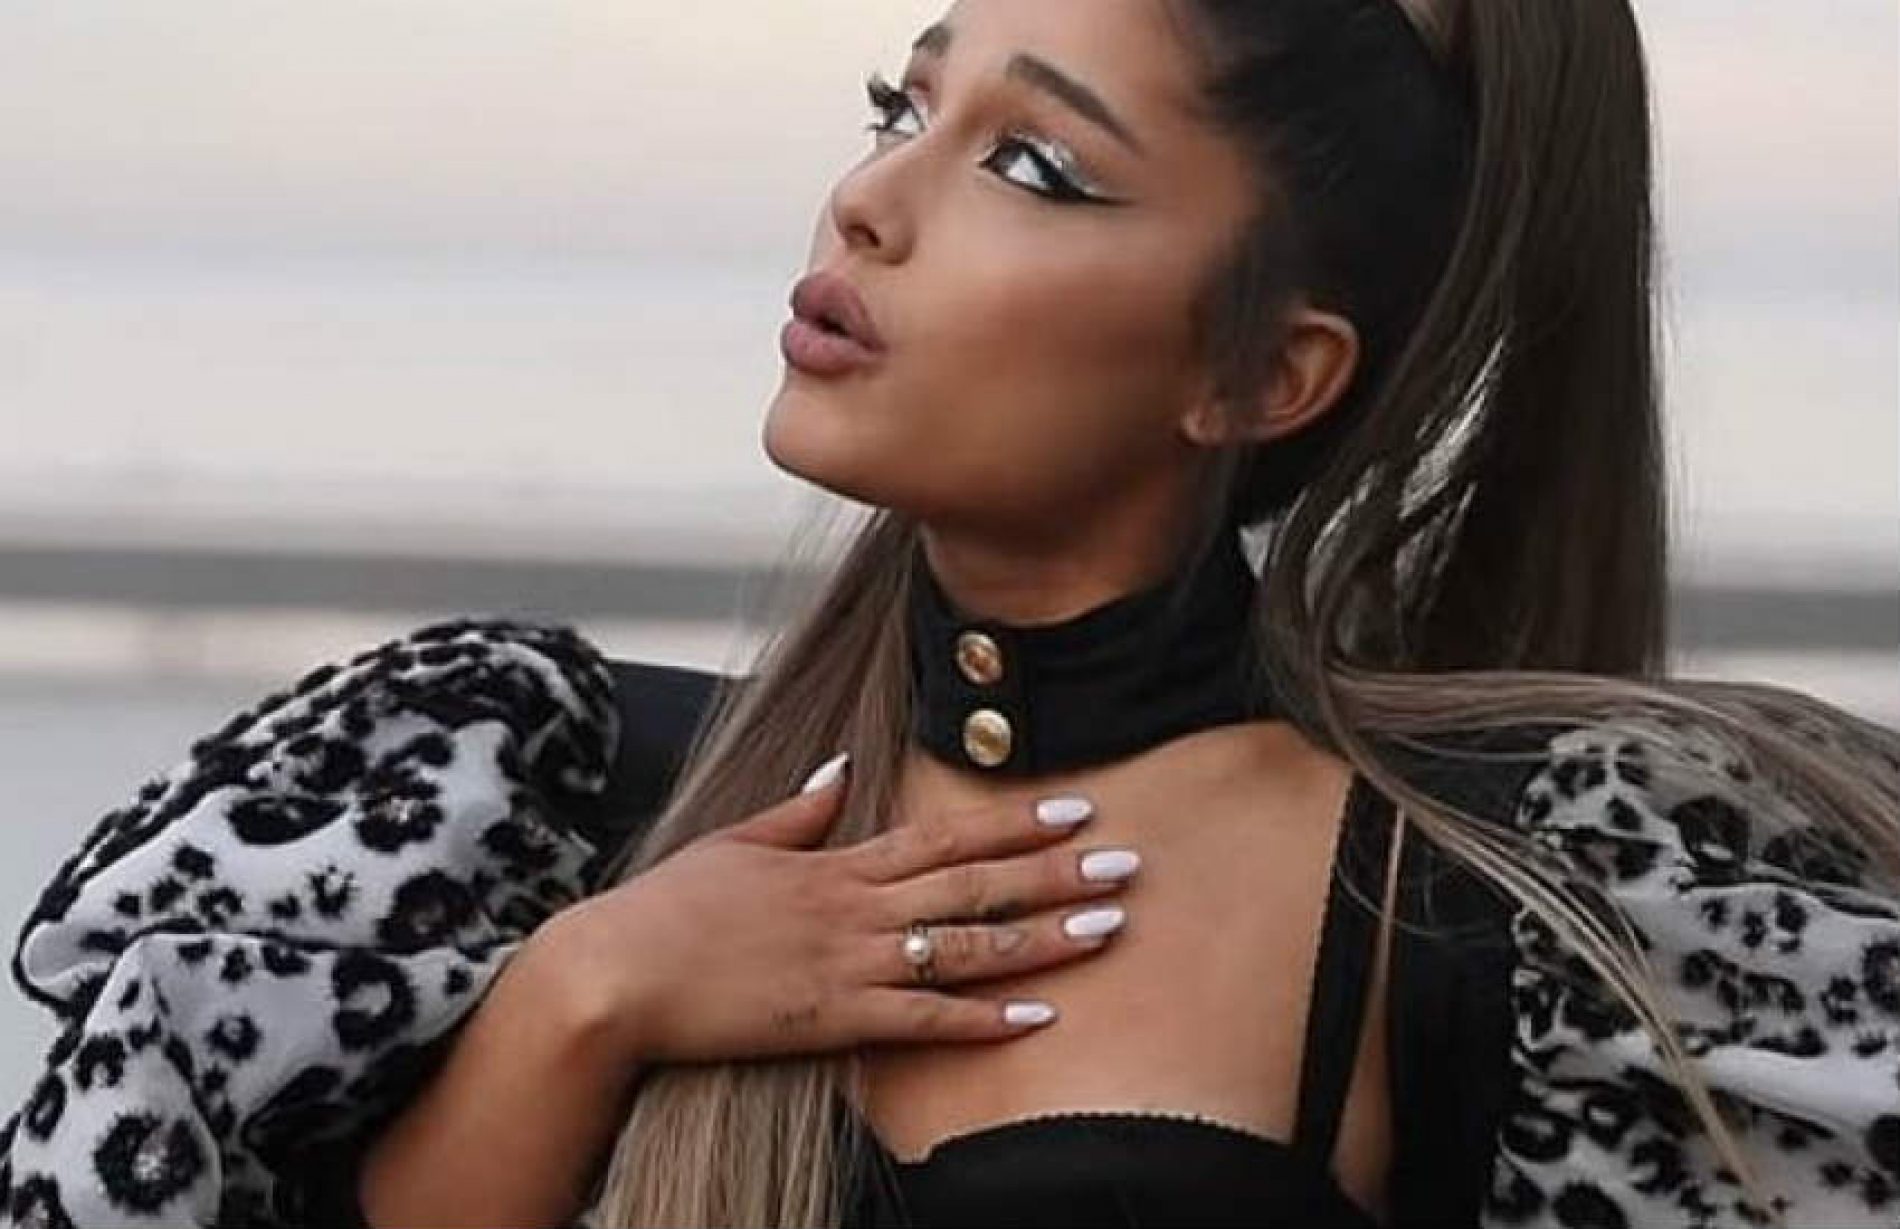 ‘If you like women, why didn’t you just say so?’ Queer Twitter’s reactions to Ariana Grande not-coming-out